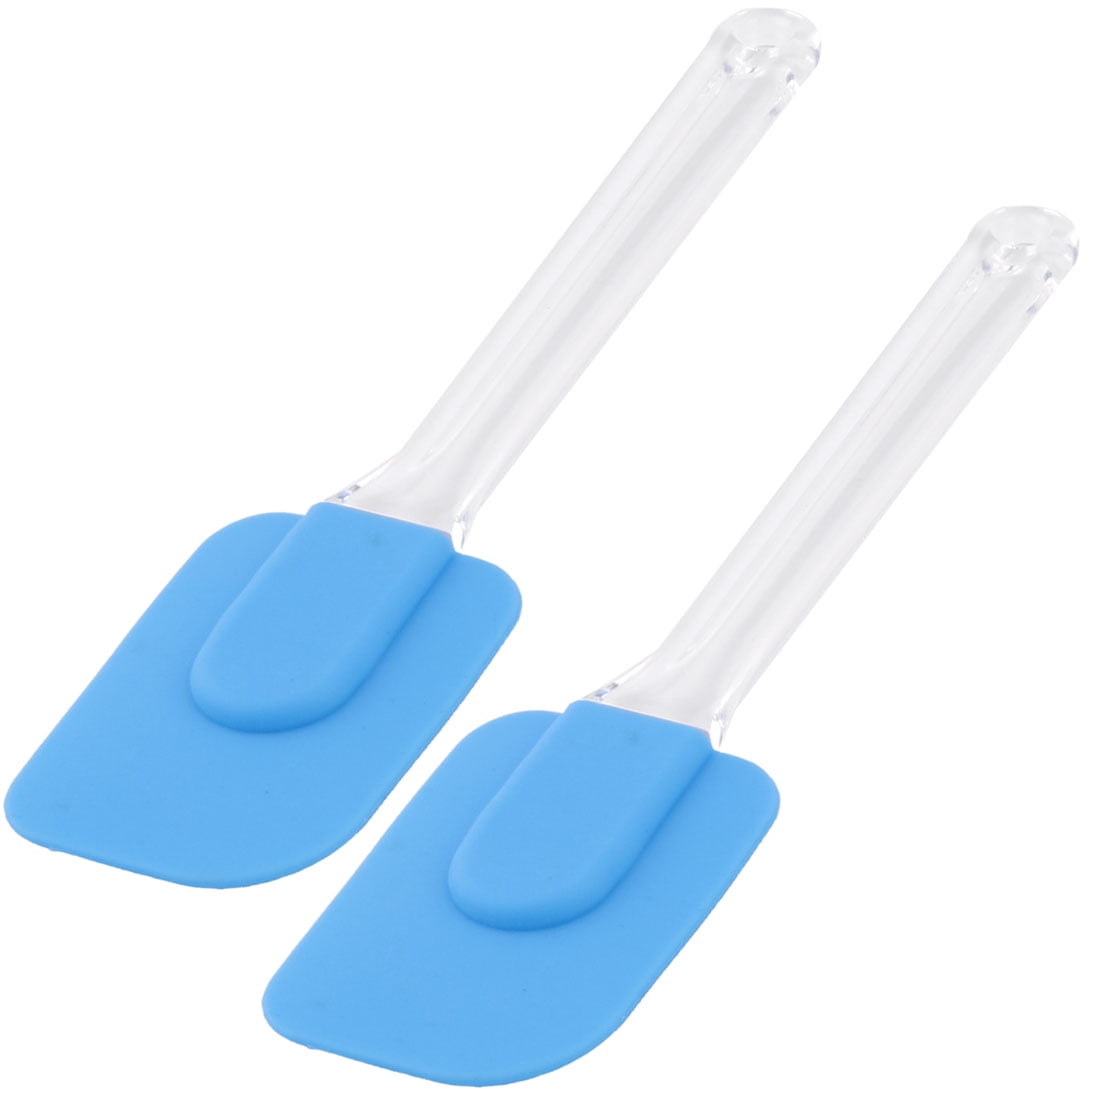 Cooking Baking Cake Butter Kitchen Utensil Silicone Spatula Rubber High H4M7 